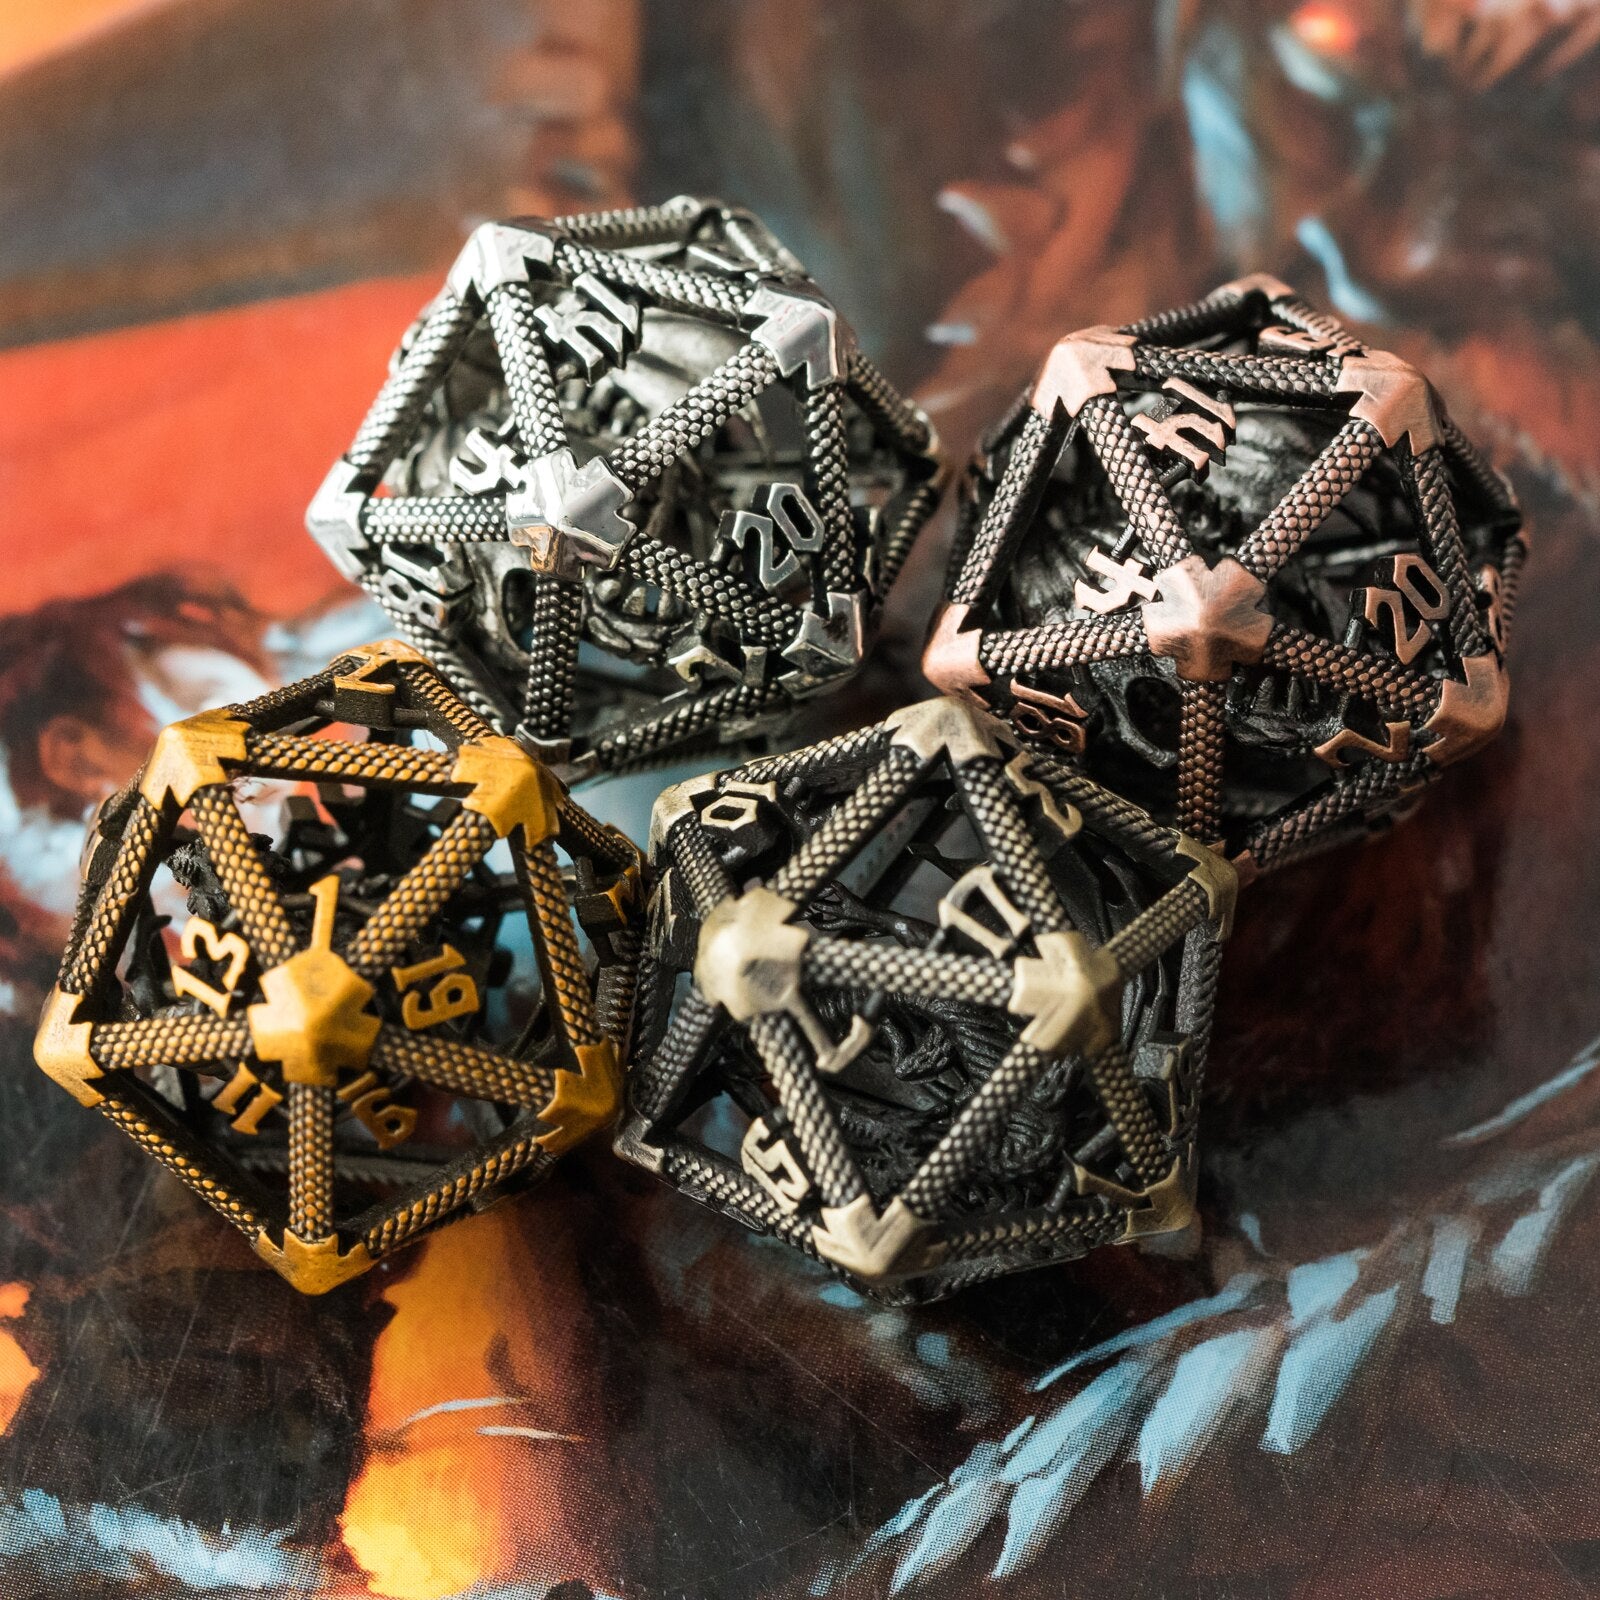 D20 Spinner Ring - Dice Druid - TTRPG Dice and Accessories